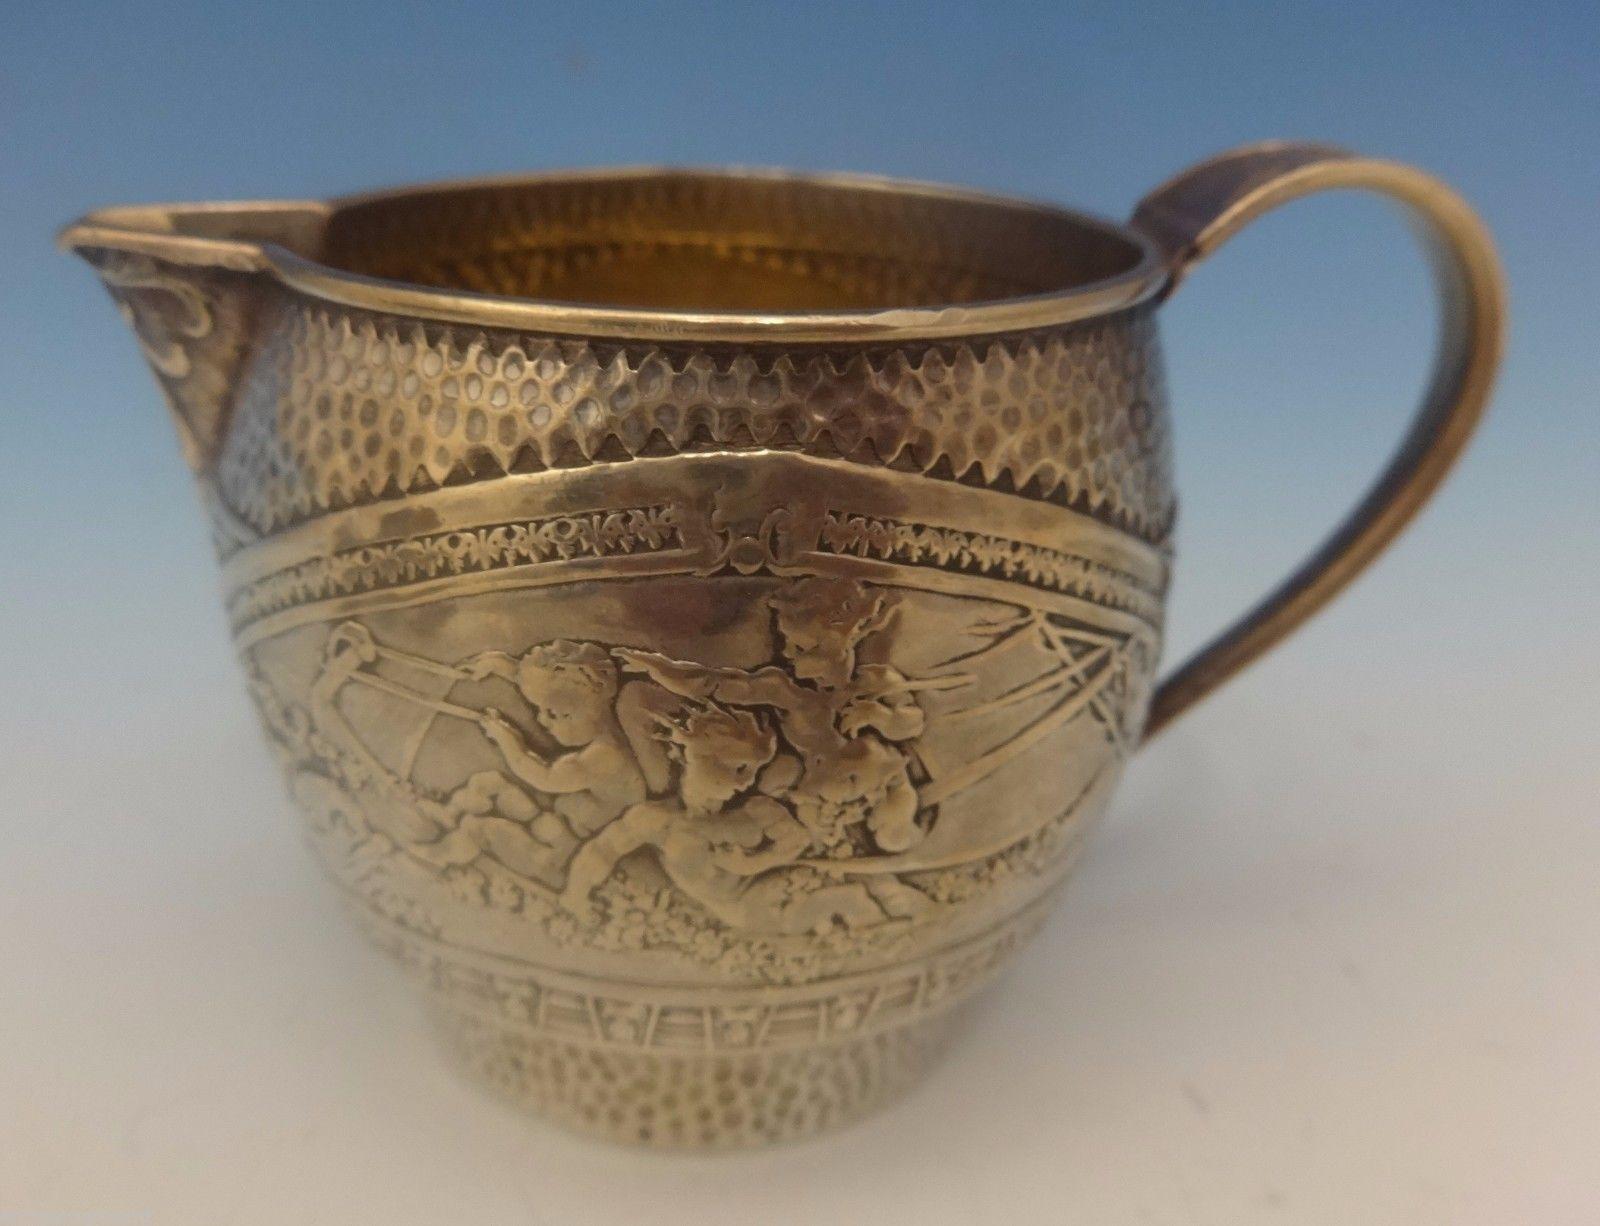 Aurora by Gorham
Gorham sterling sugar bowl and creamer in the pattern Aurora patented in 1870 featuring three figural putti/cherubs in a boat. The pieces are marked with #2275 and date letter M for 1880. The sugar bowl has a swing handle and has